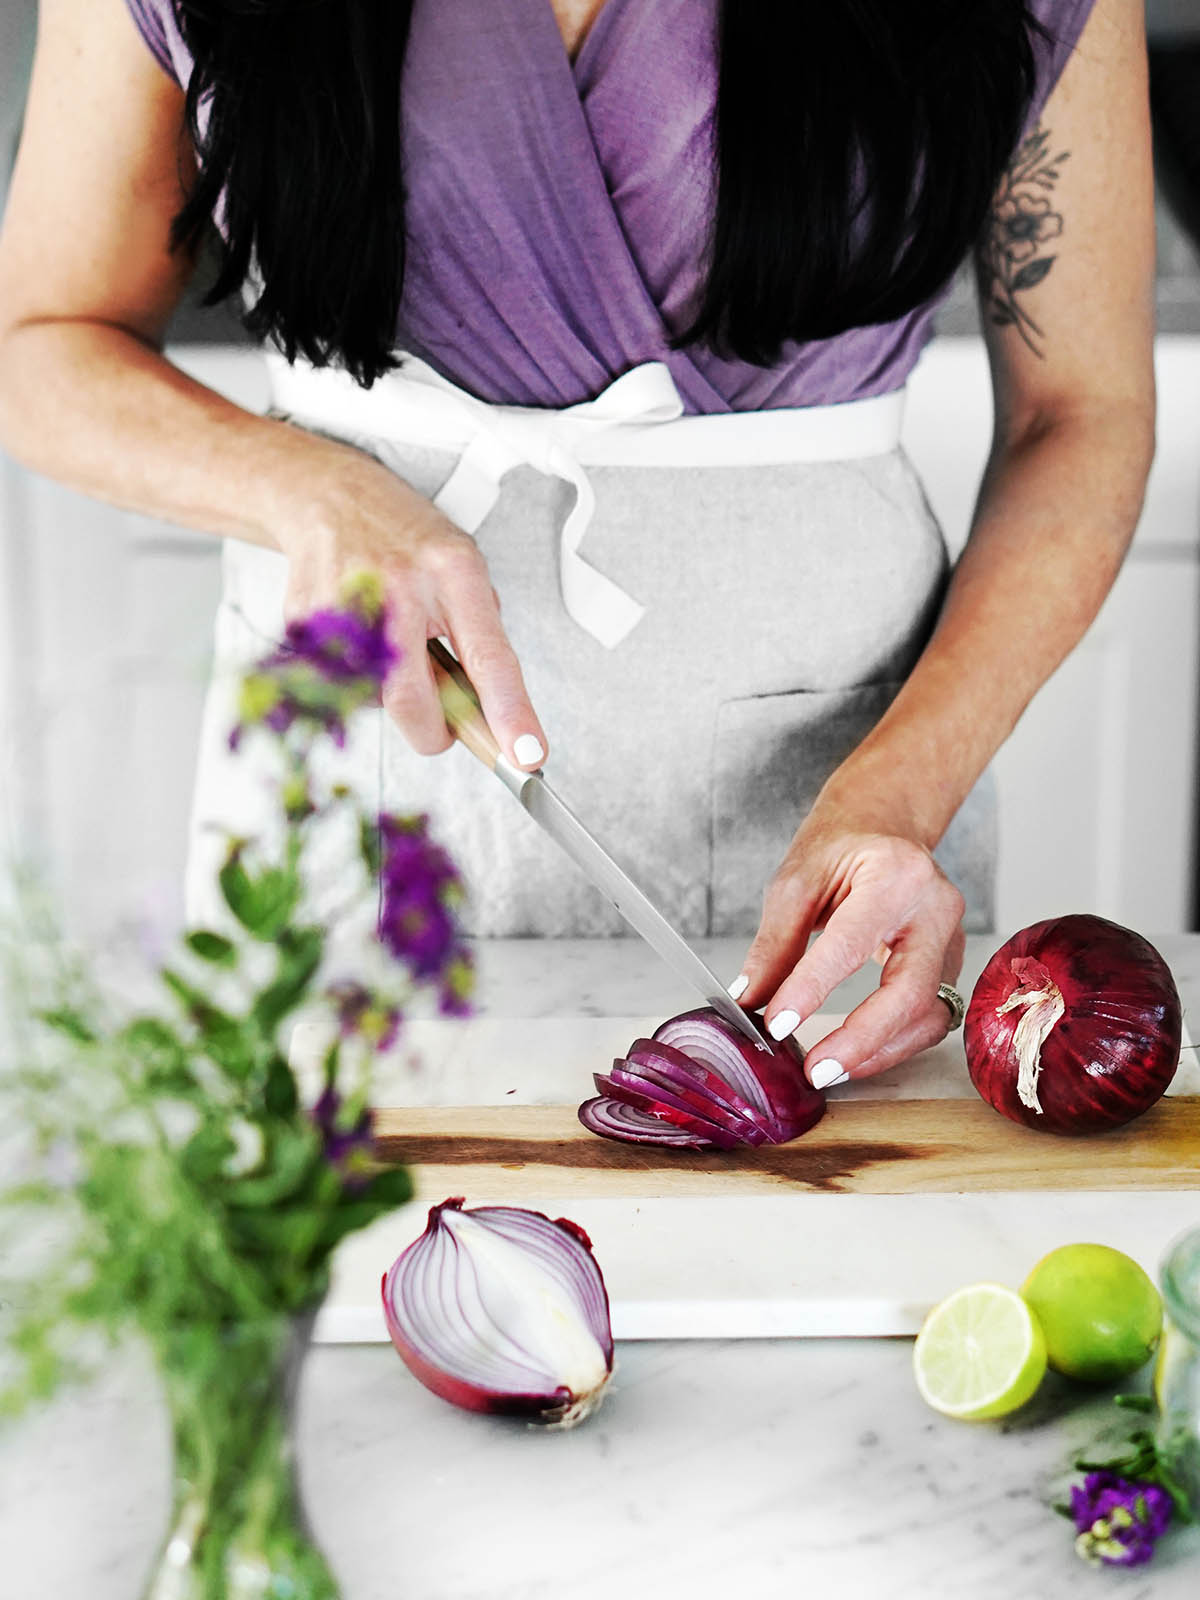 A woman slicing onions to make Mexican Red Onions.